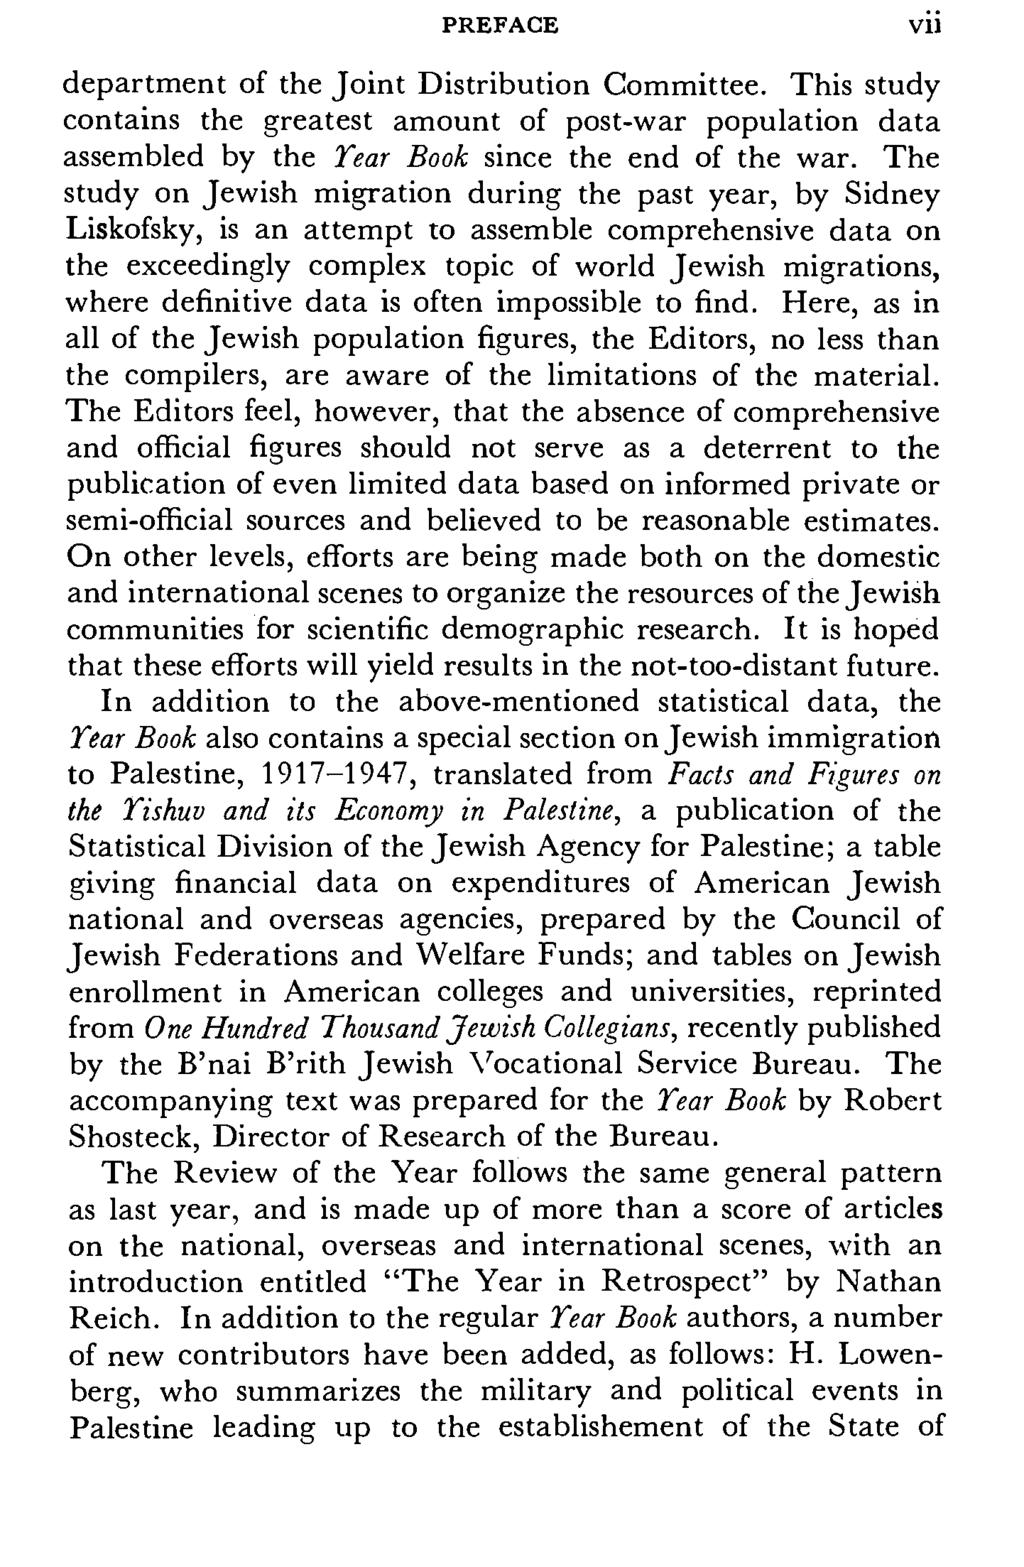 PREFACE Vll department of the Joint Distribution Committee. This study contains the greatest amount of post-war population data assembled by the Year Book since the end of the war.